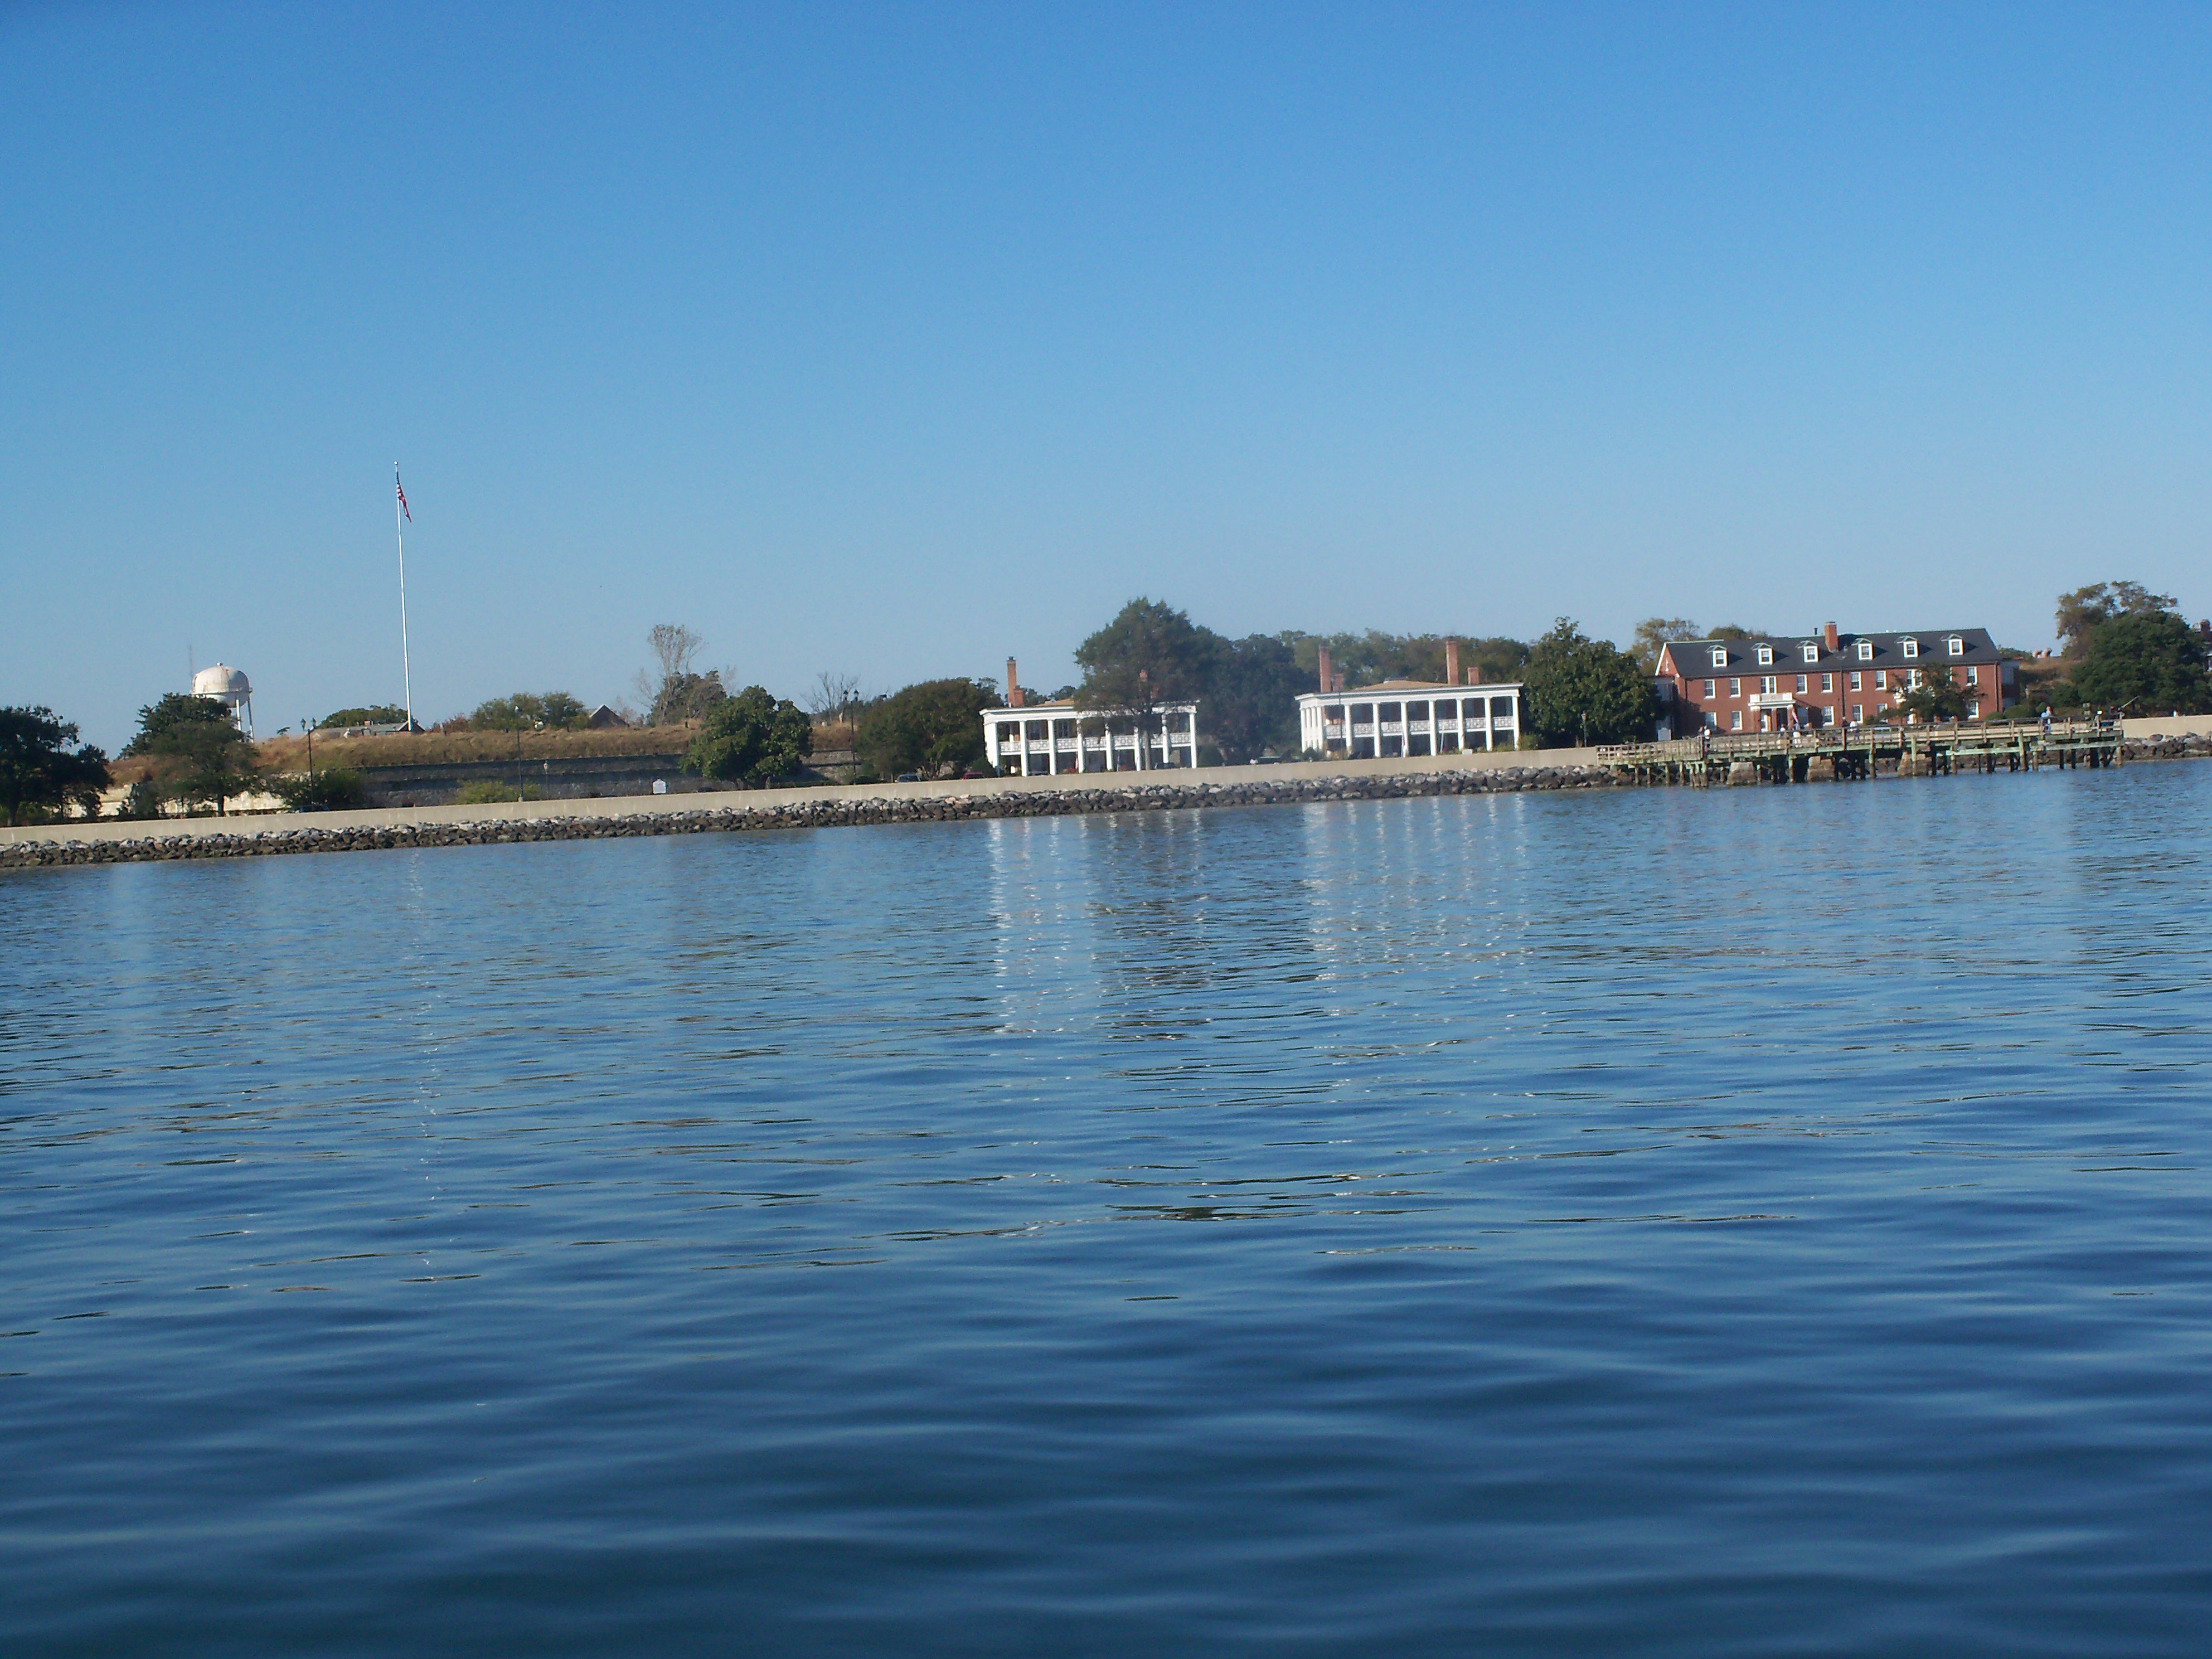 Passing Fort Monroe to Starboard